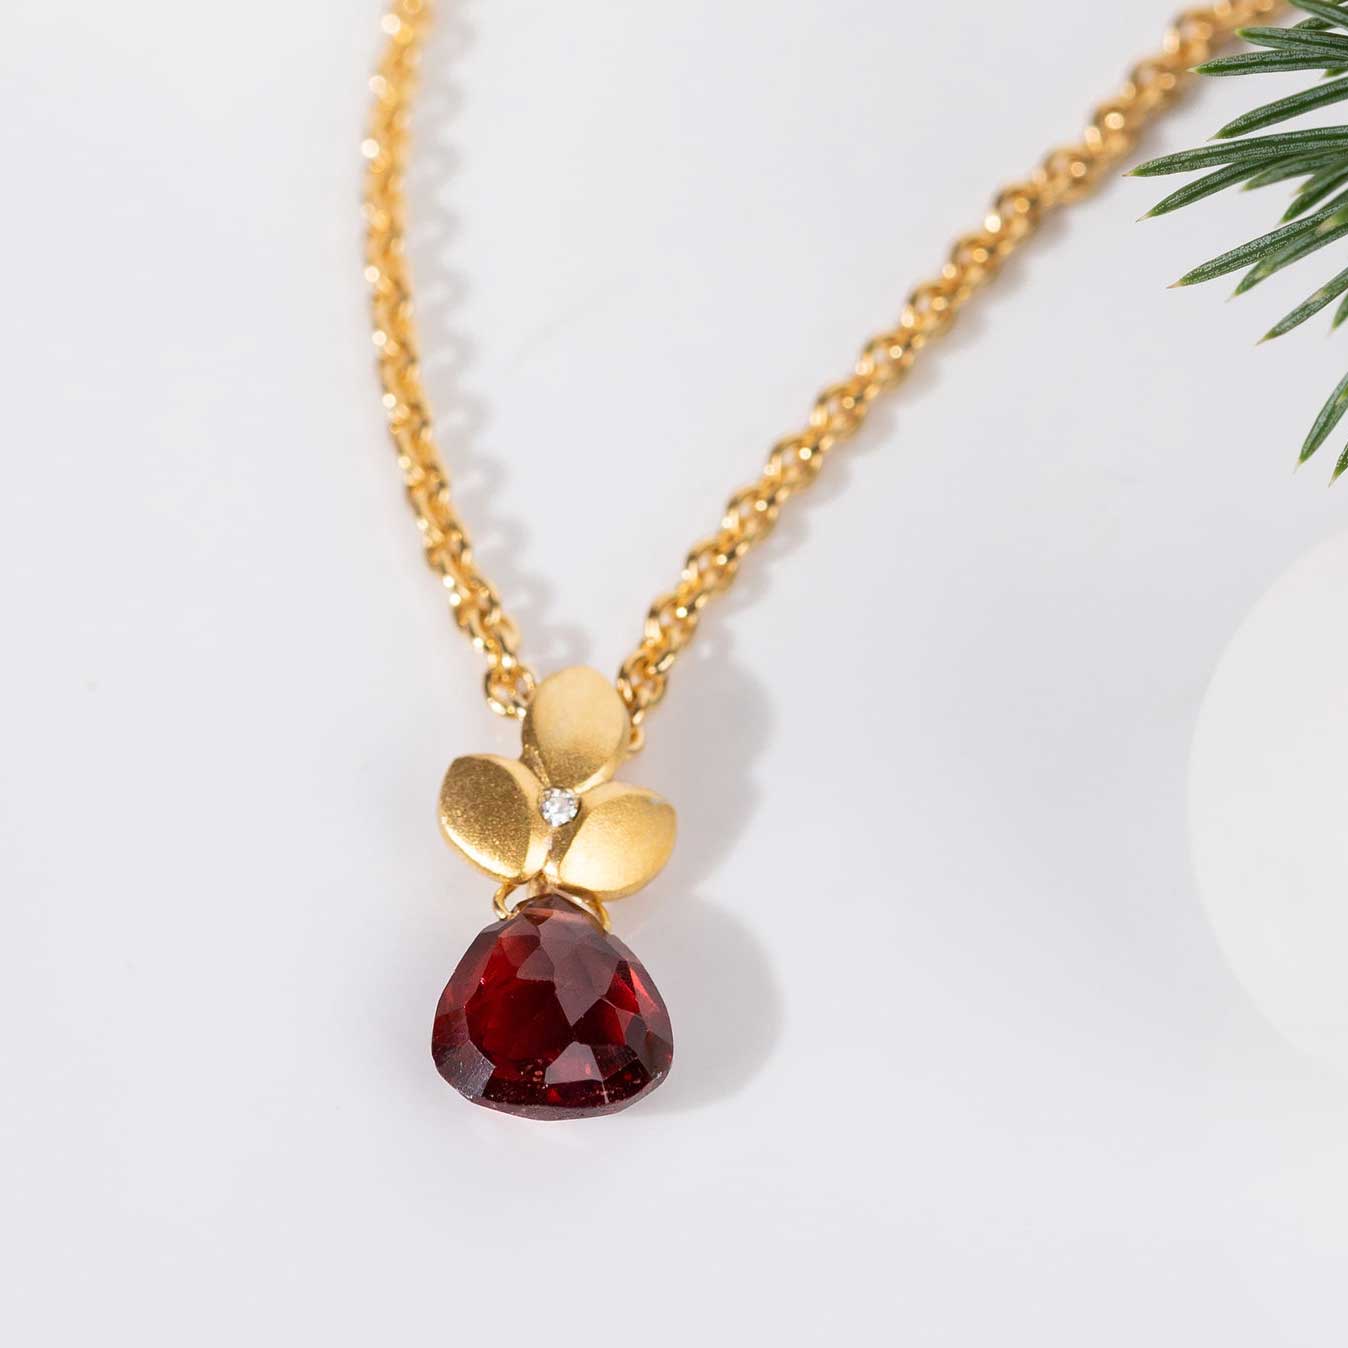 9ct Gold Garnet And Diamond Necklace - EXCLUSIVE - R8340 | F.Hinds Jewellers